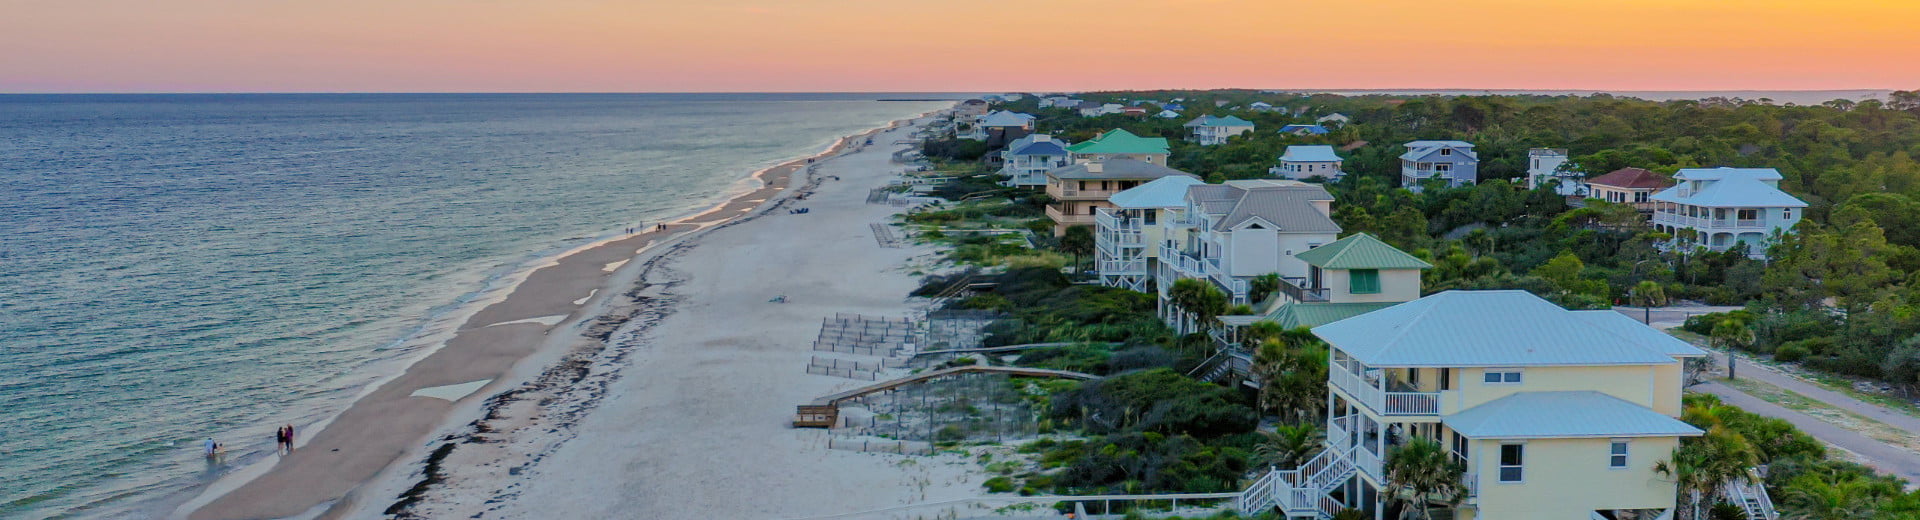 St. George Island Florida Homes For Sale